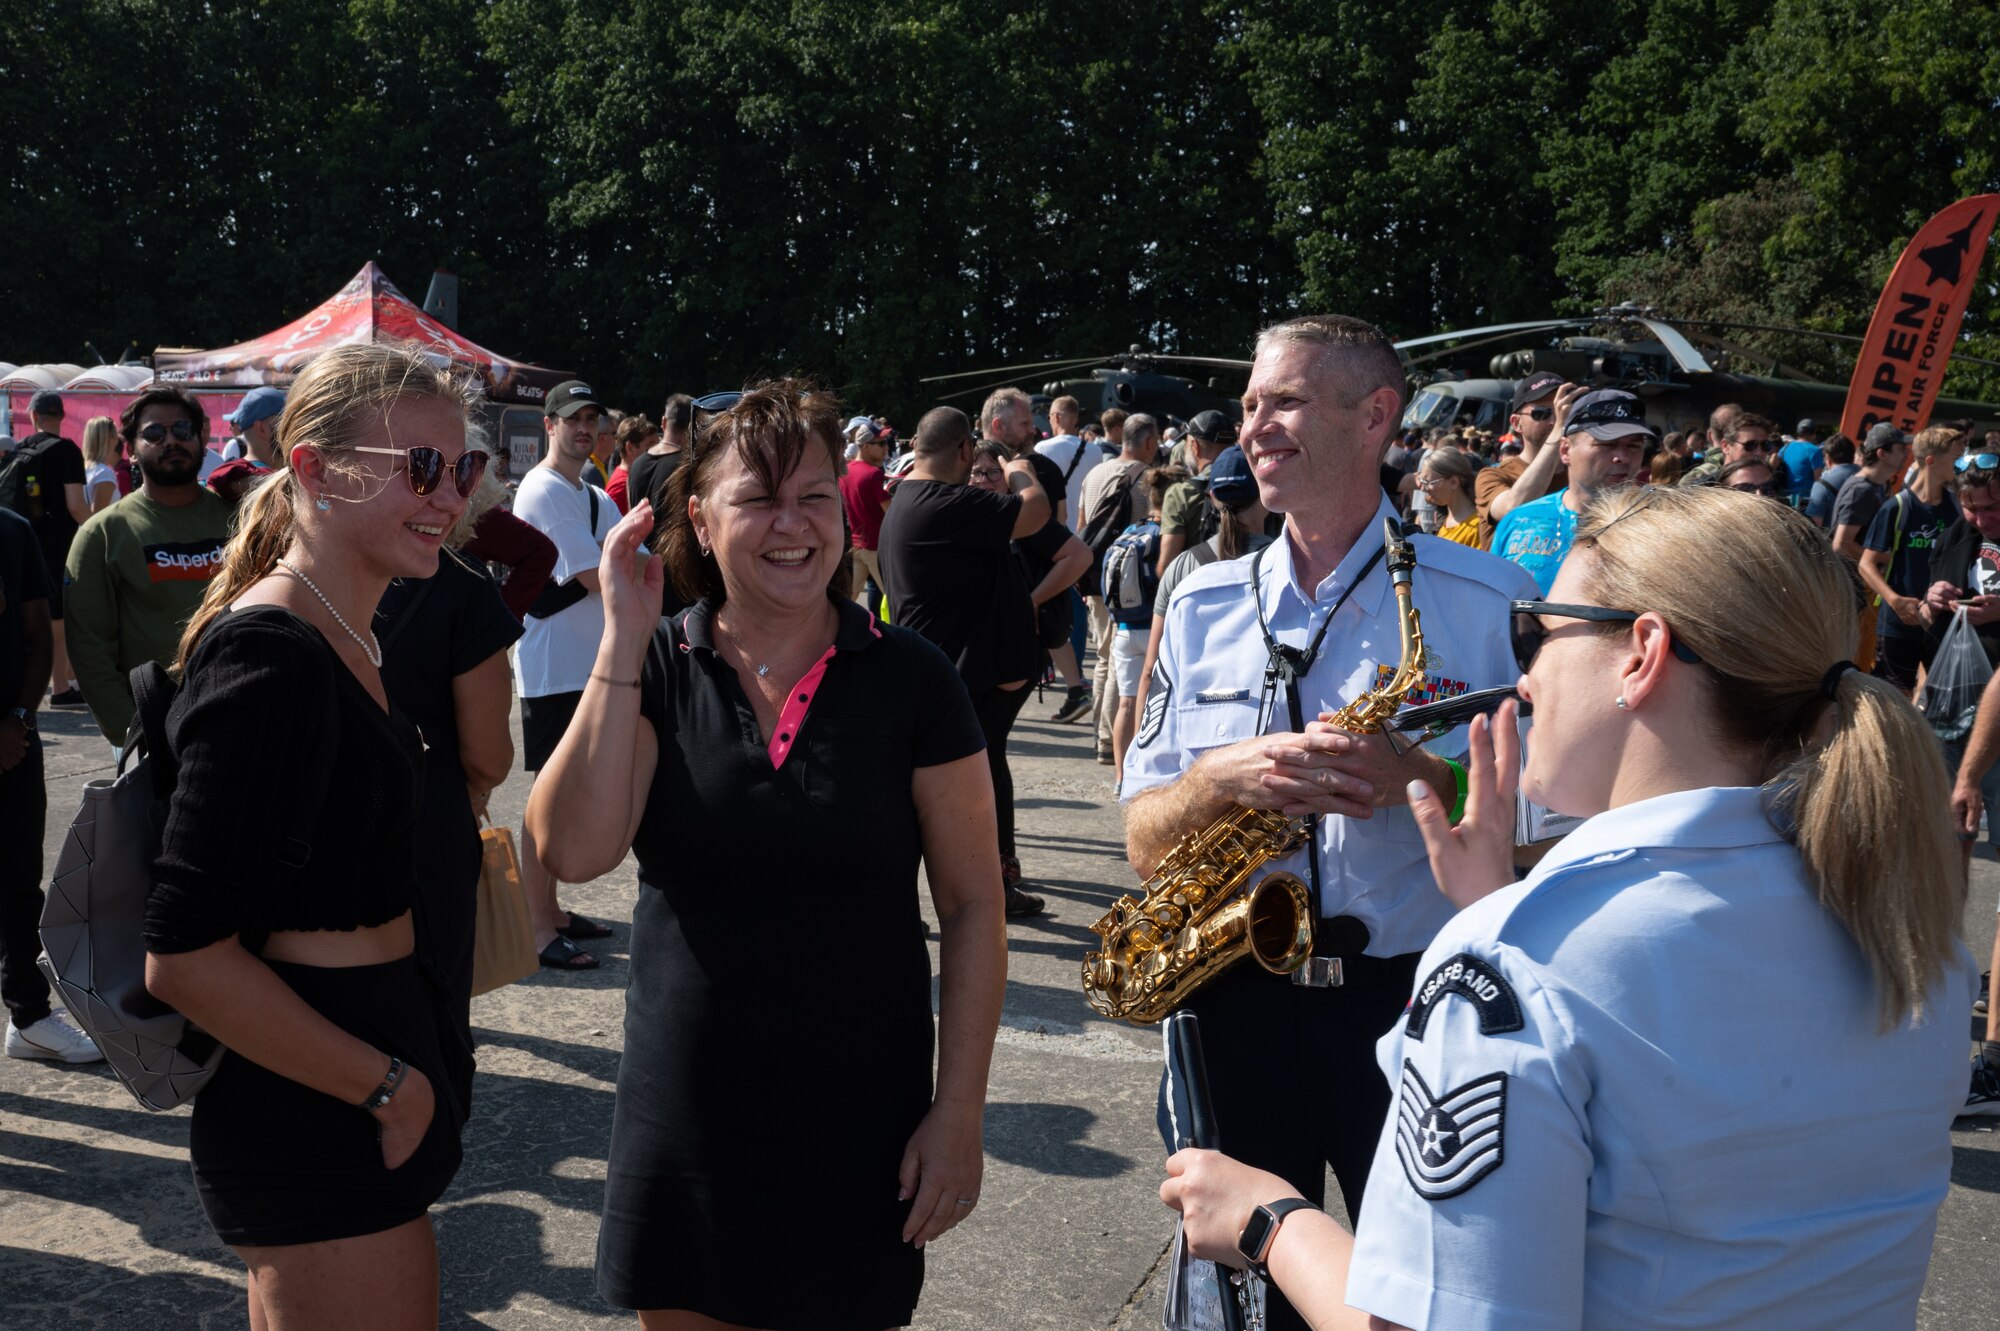 U.S. Air Force Airmen assigned to the U.S. Air Forces in Europe Ceremonial Band, speak with spectators during the NATO Days event at Leoš Janáček Airport in Ostrava, Czech Republic, Sept. 17, 2023.